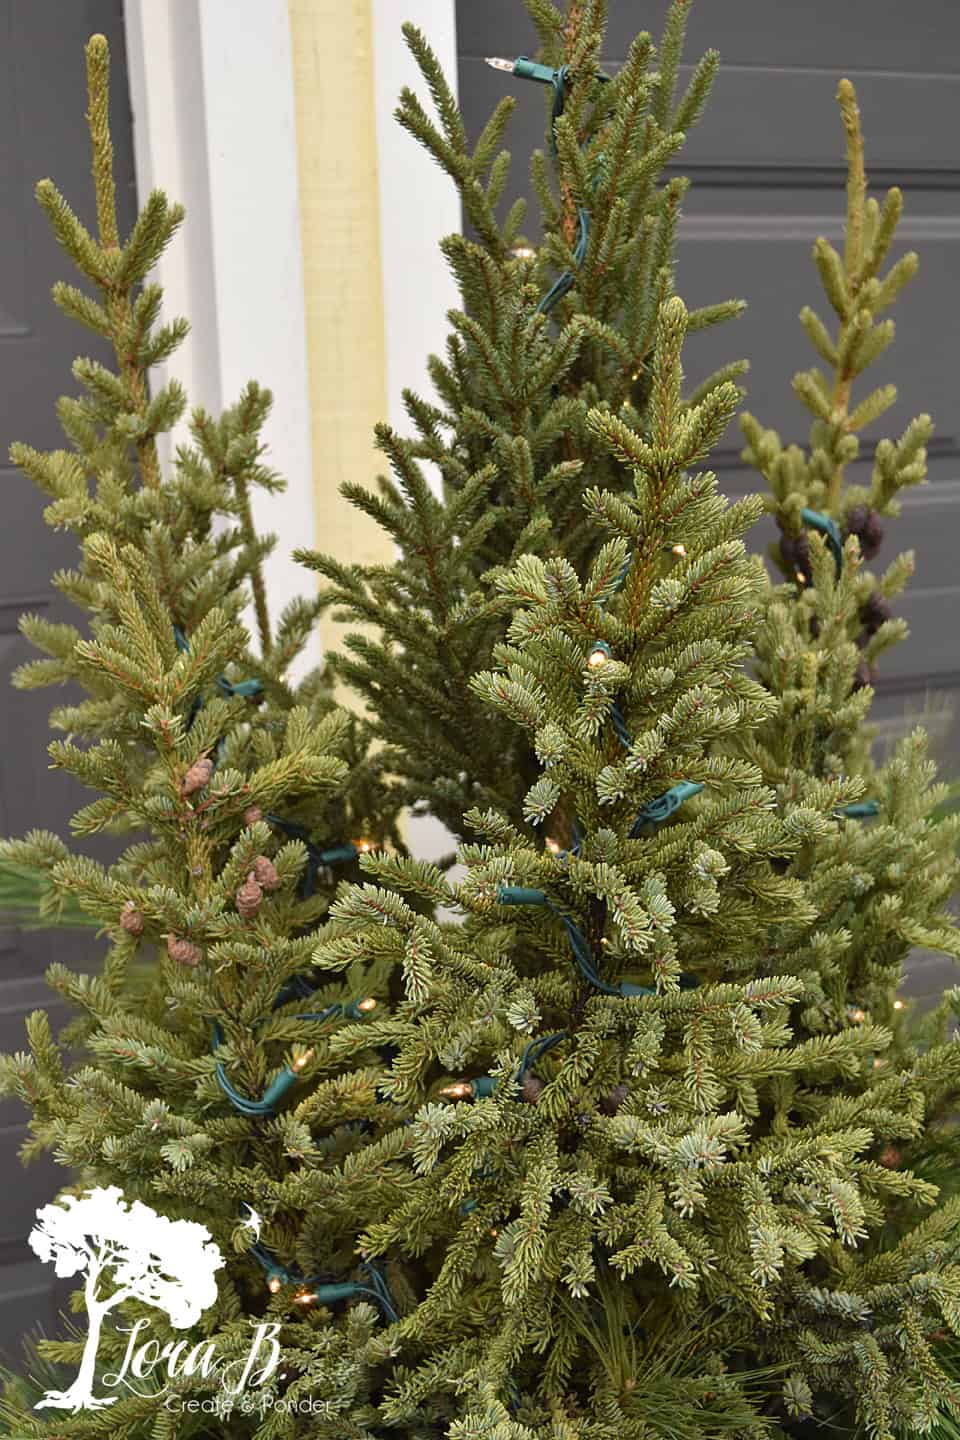 Place the lights on your spruce tips before any other decorations.